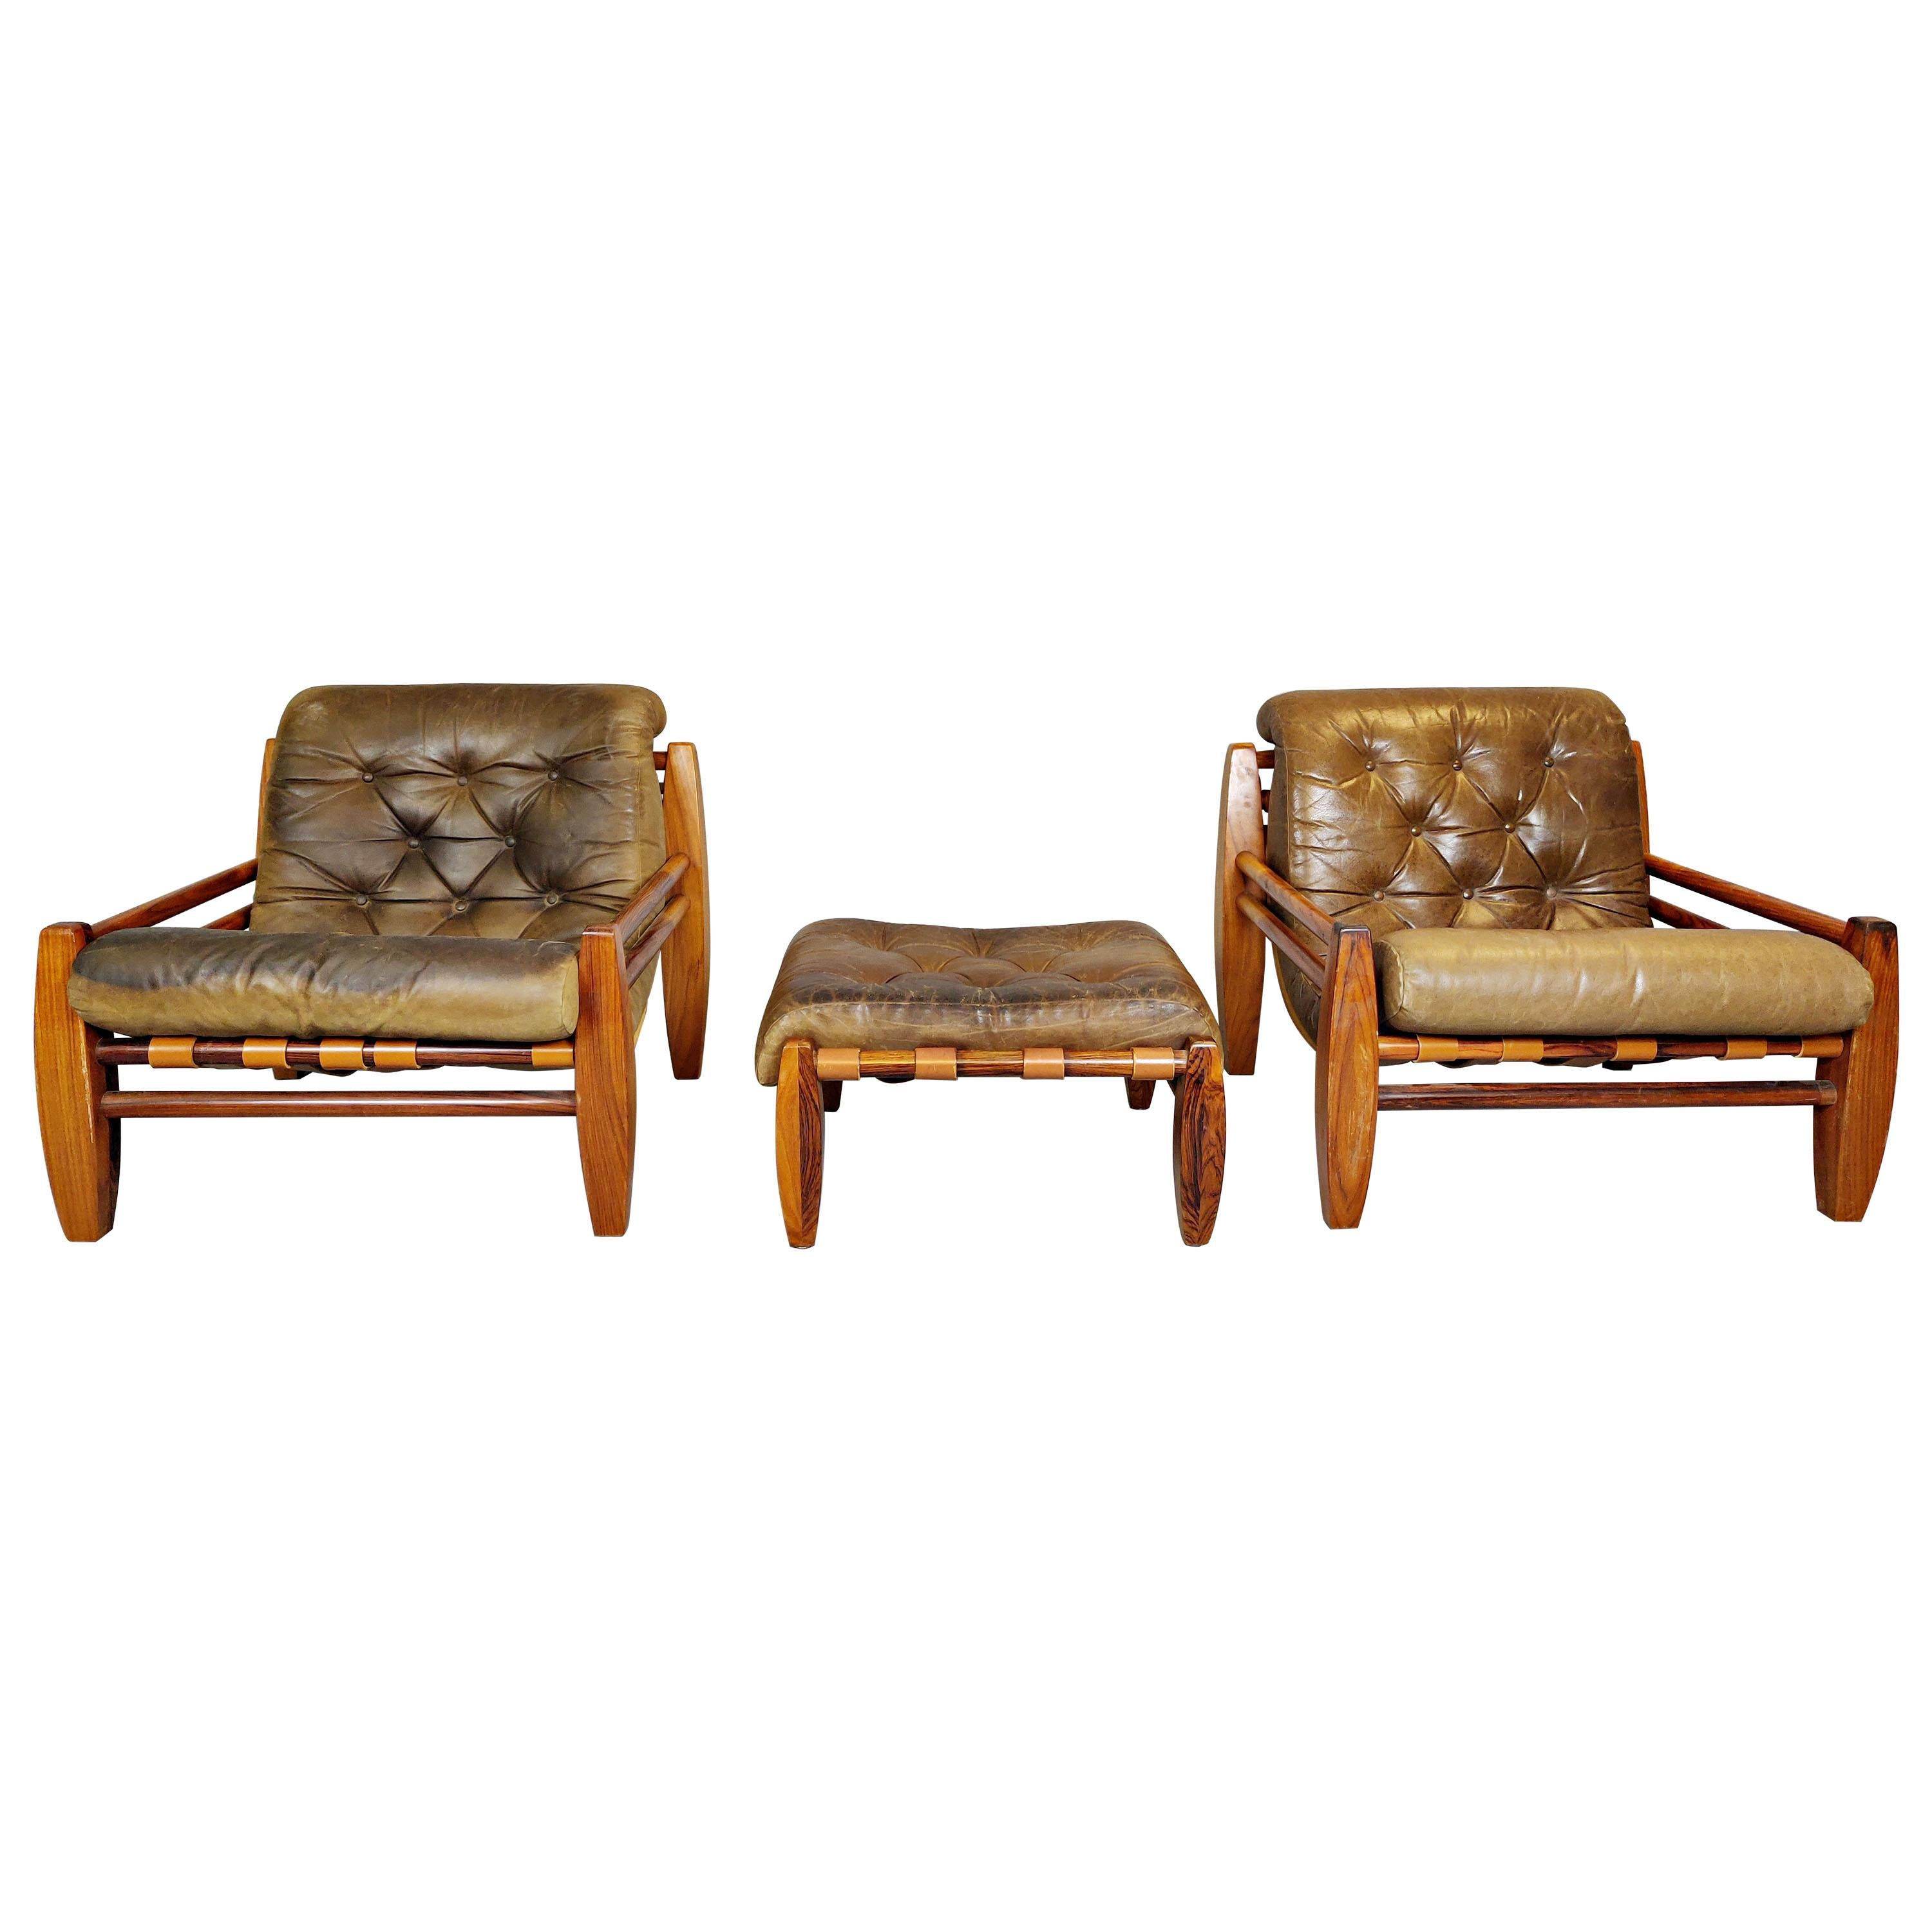 Set of Two Wood and Leather Armchairs with Their Pouf